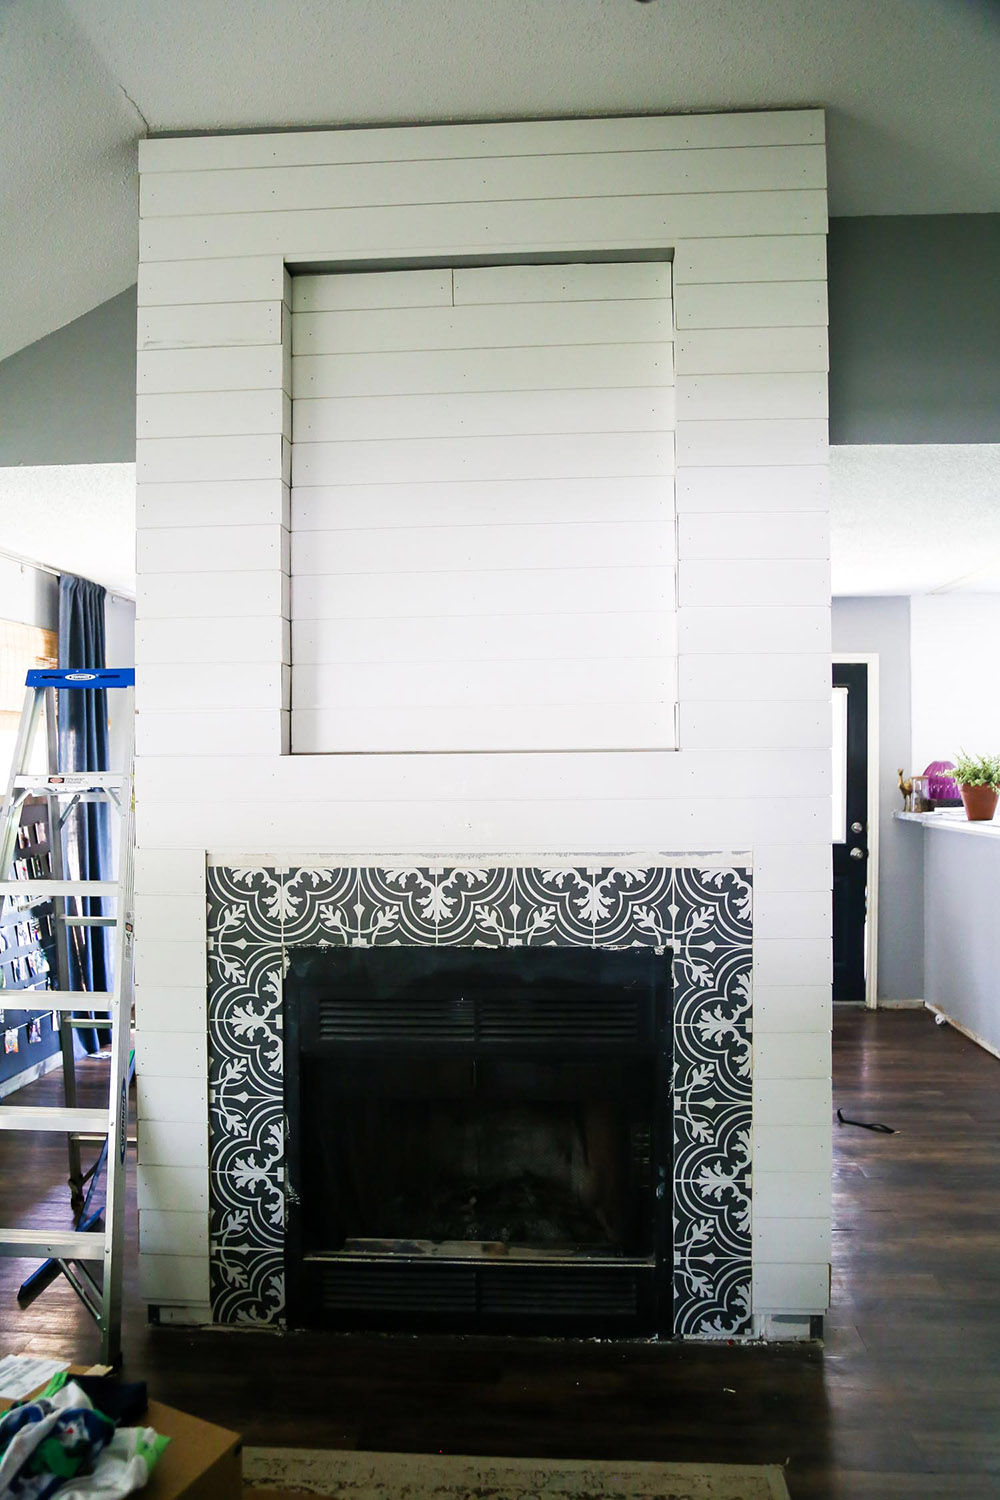 A fireplace with white shiplap exterior and mosaic tiles around the fireplace.